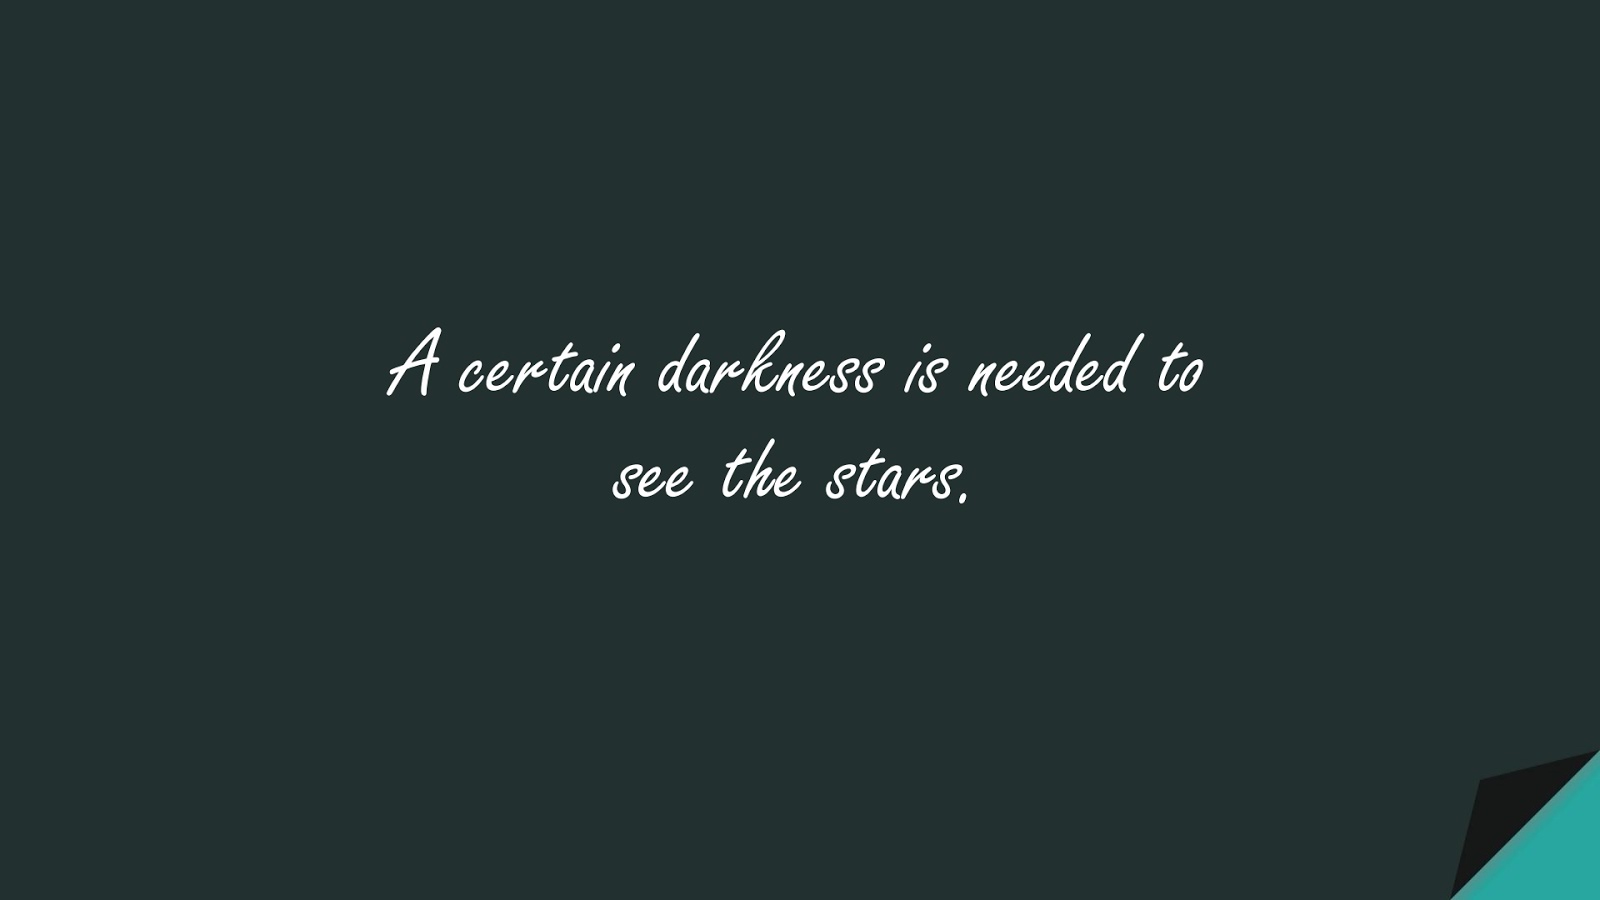 A certain darkness is needed to see the stars.FALSE